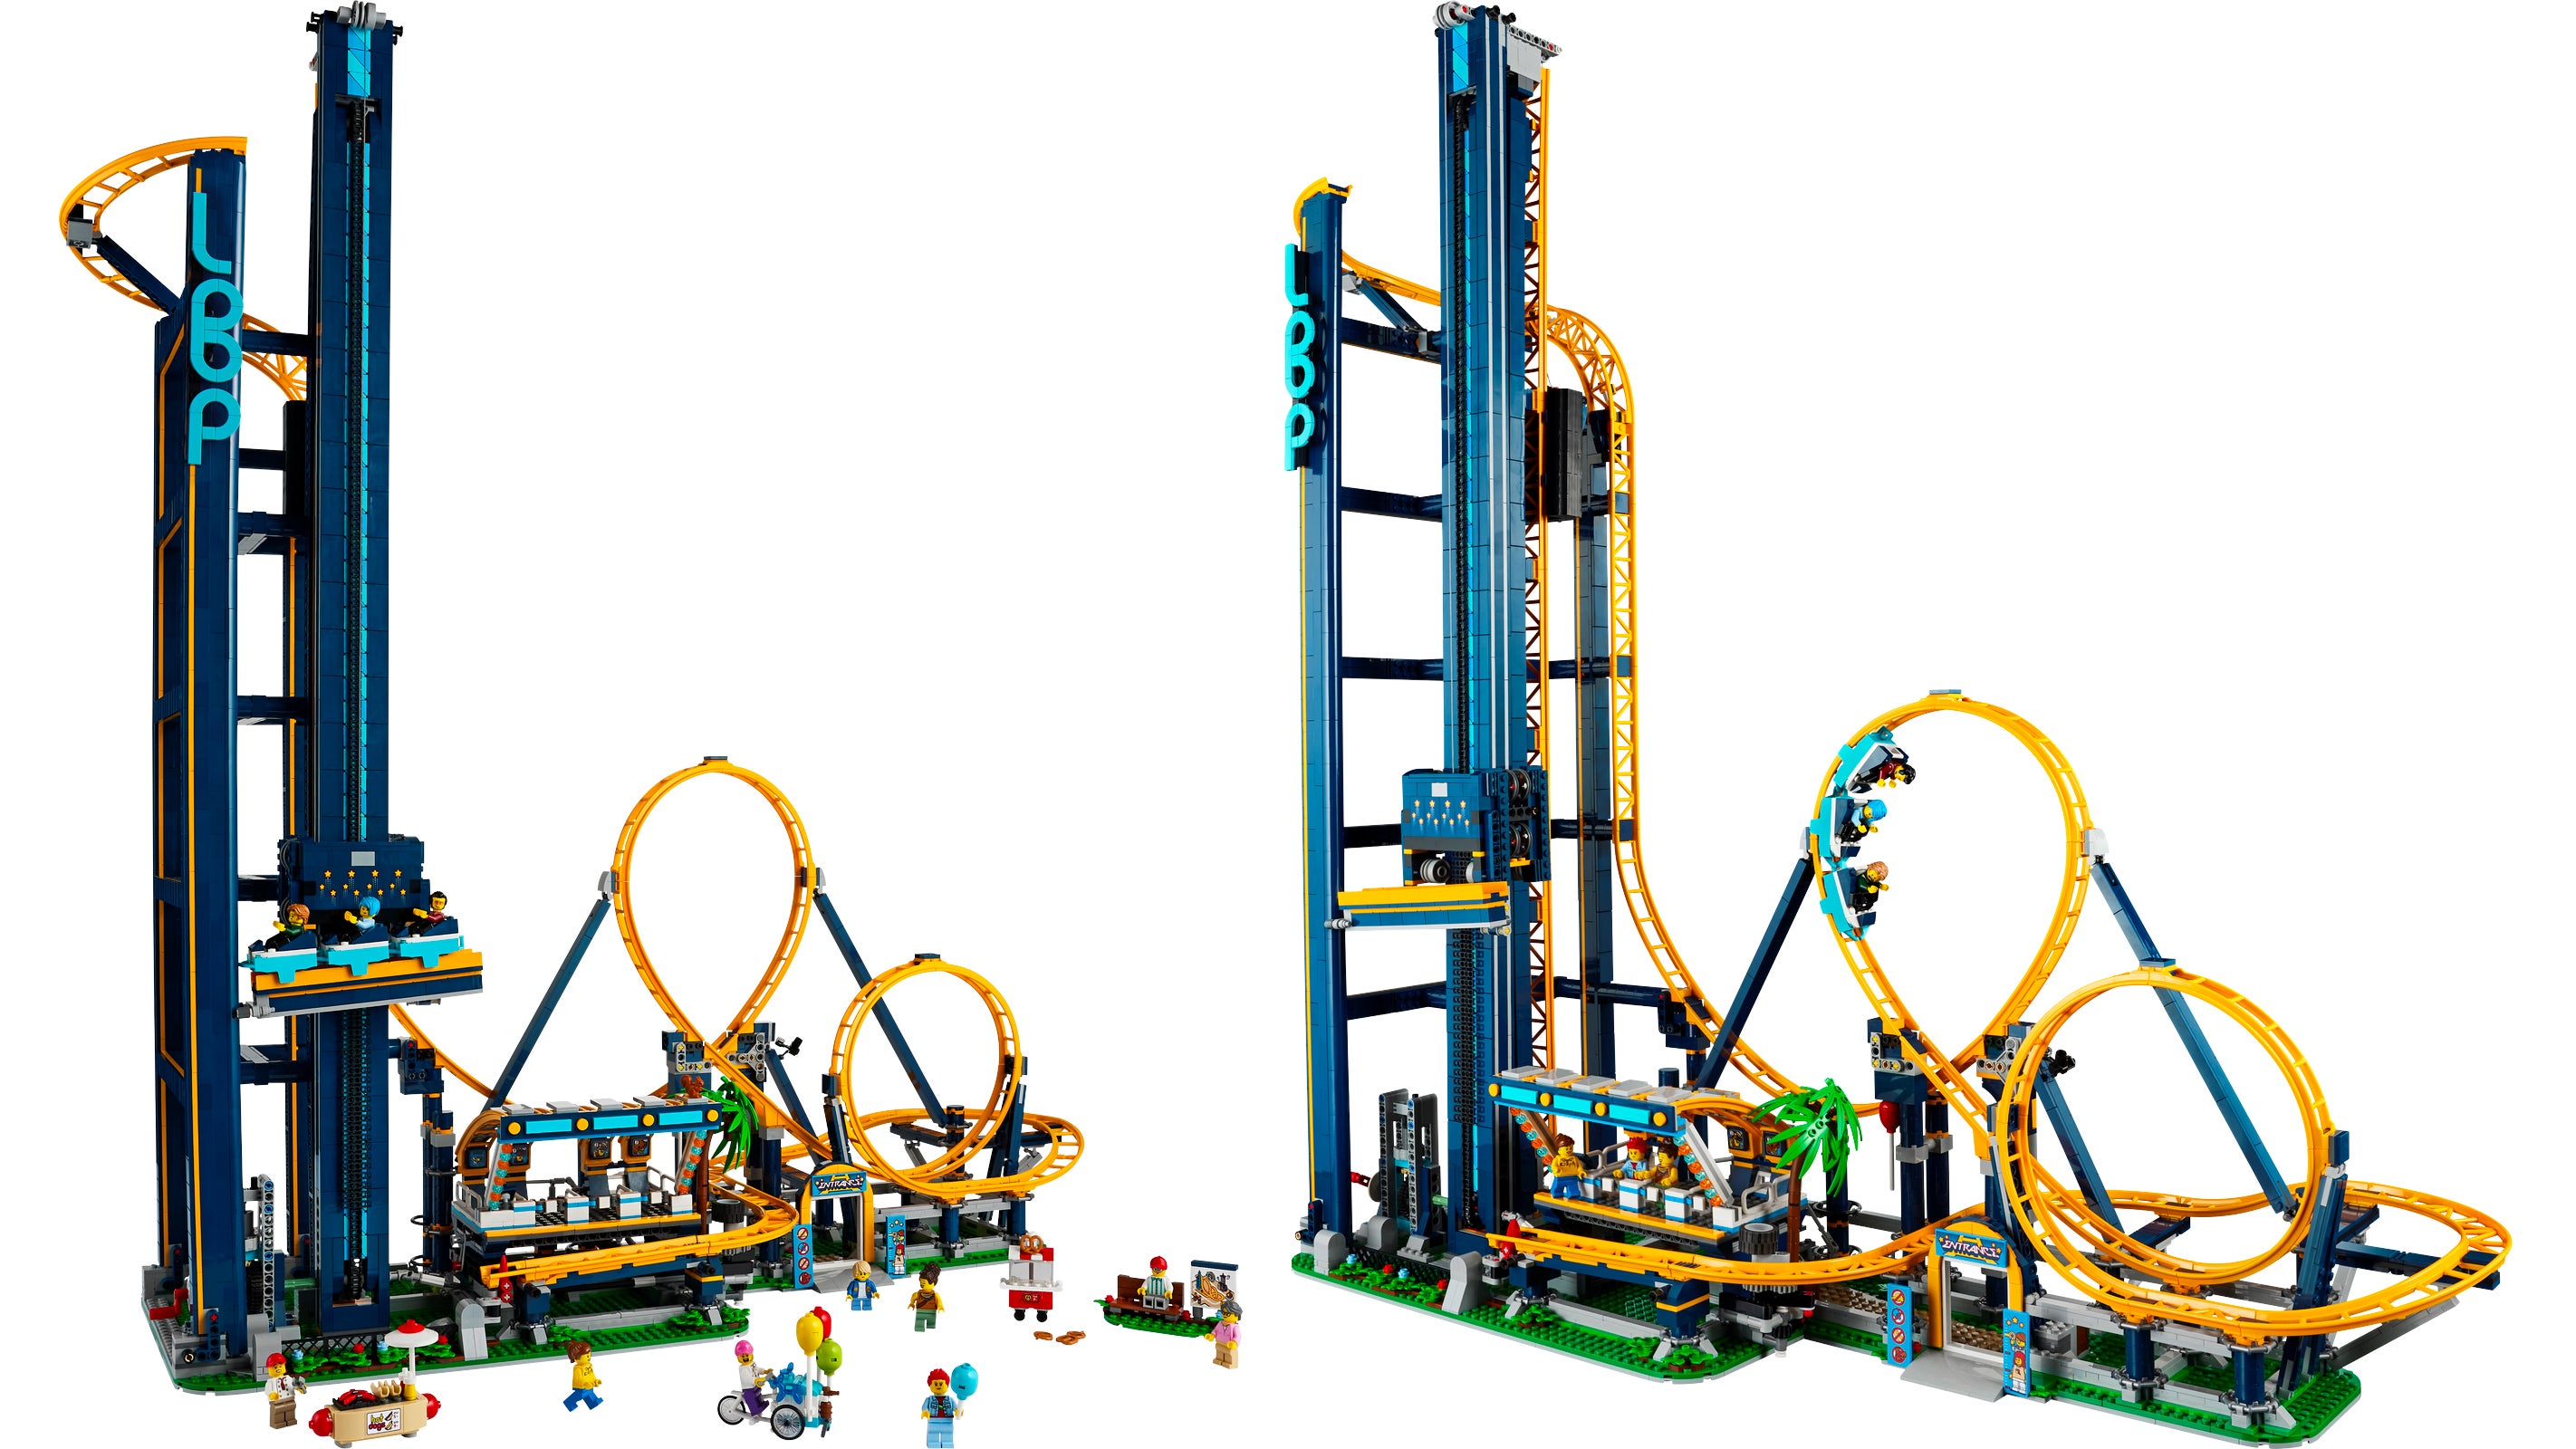 LEGO Roller Coaster Launches Minifig Riders From a Three-Foot Tower Through Two Full Loops